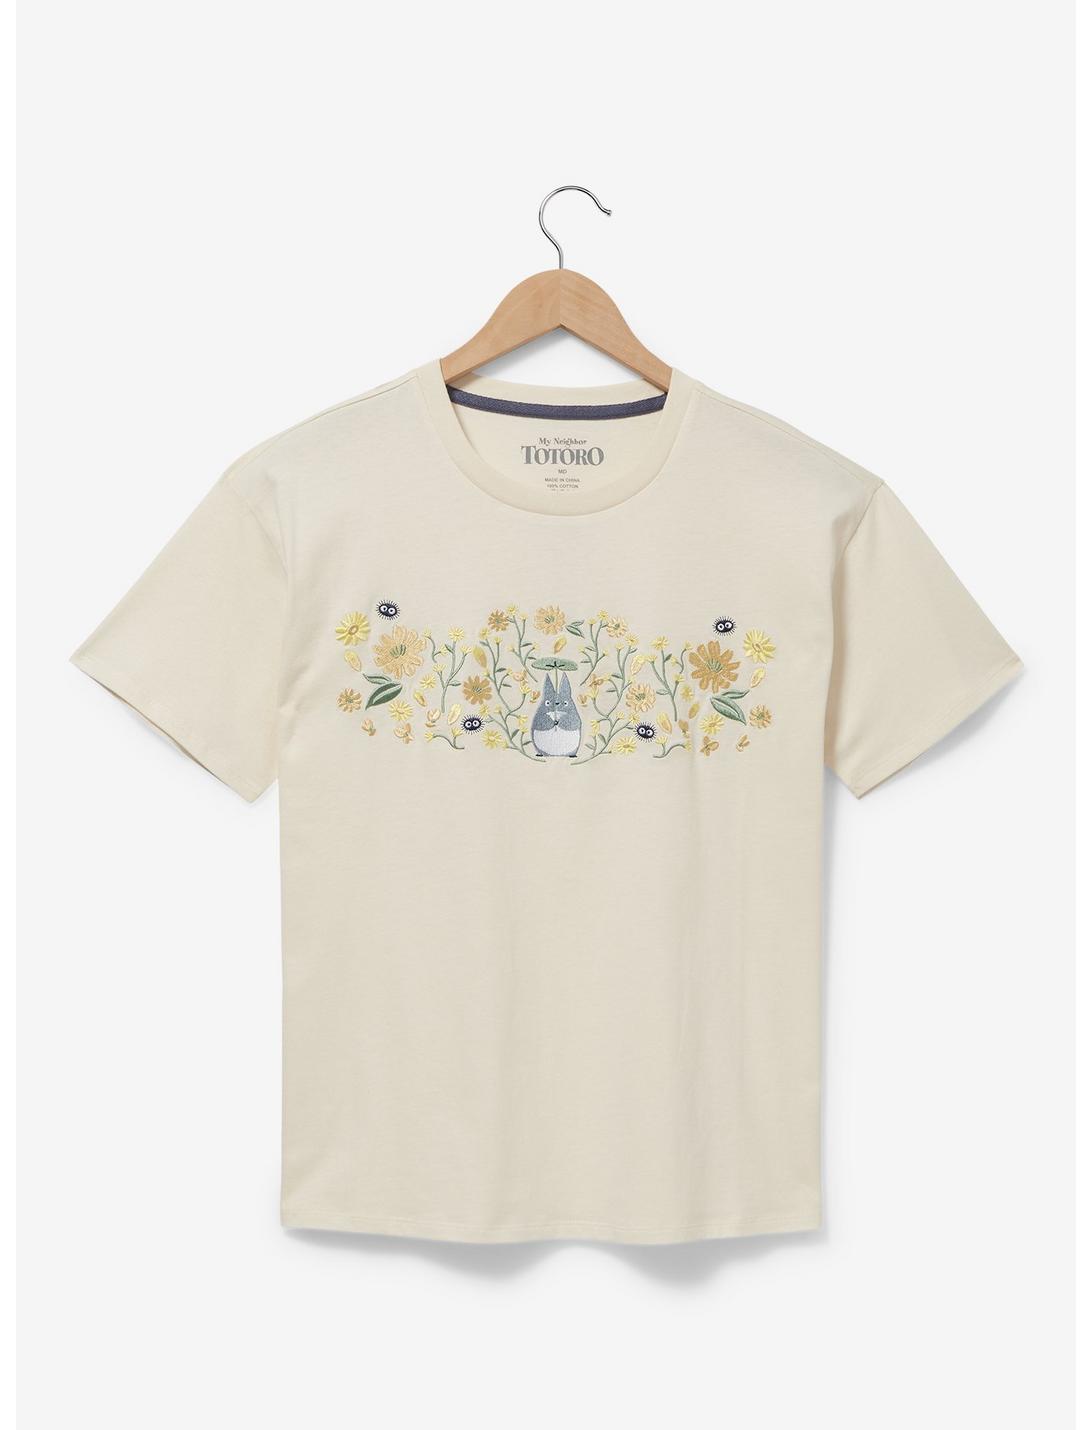 Studio Ghibli My Neighbor Totoro Floral Women's T-Shirt - BoxLunch Exclusive, OFF WHITE, hi-res